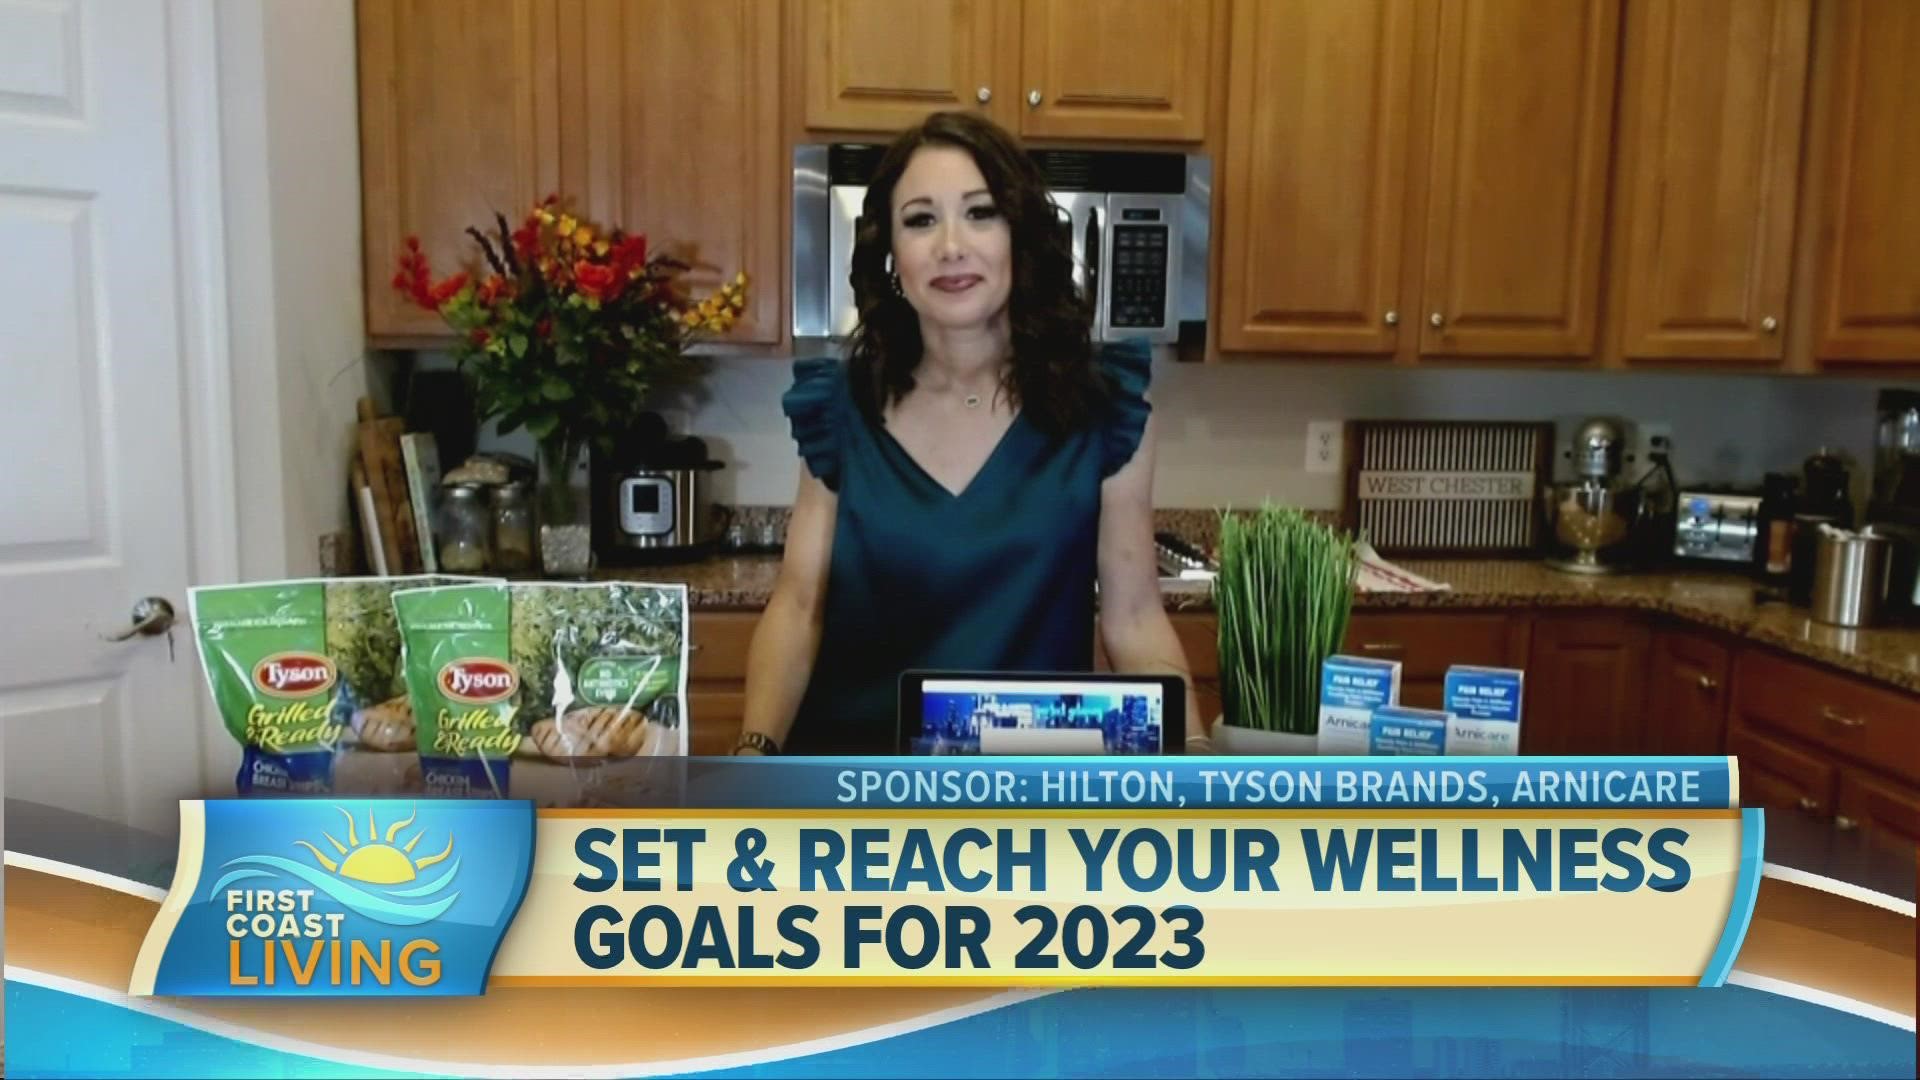 Wellness lifestyle expert, Jamie Hess helps you set and reach your wellness goals for 2023 and beyond!